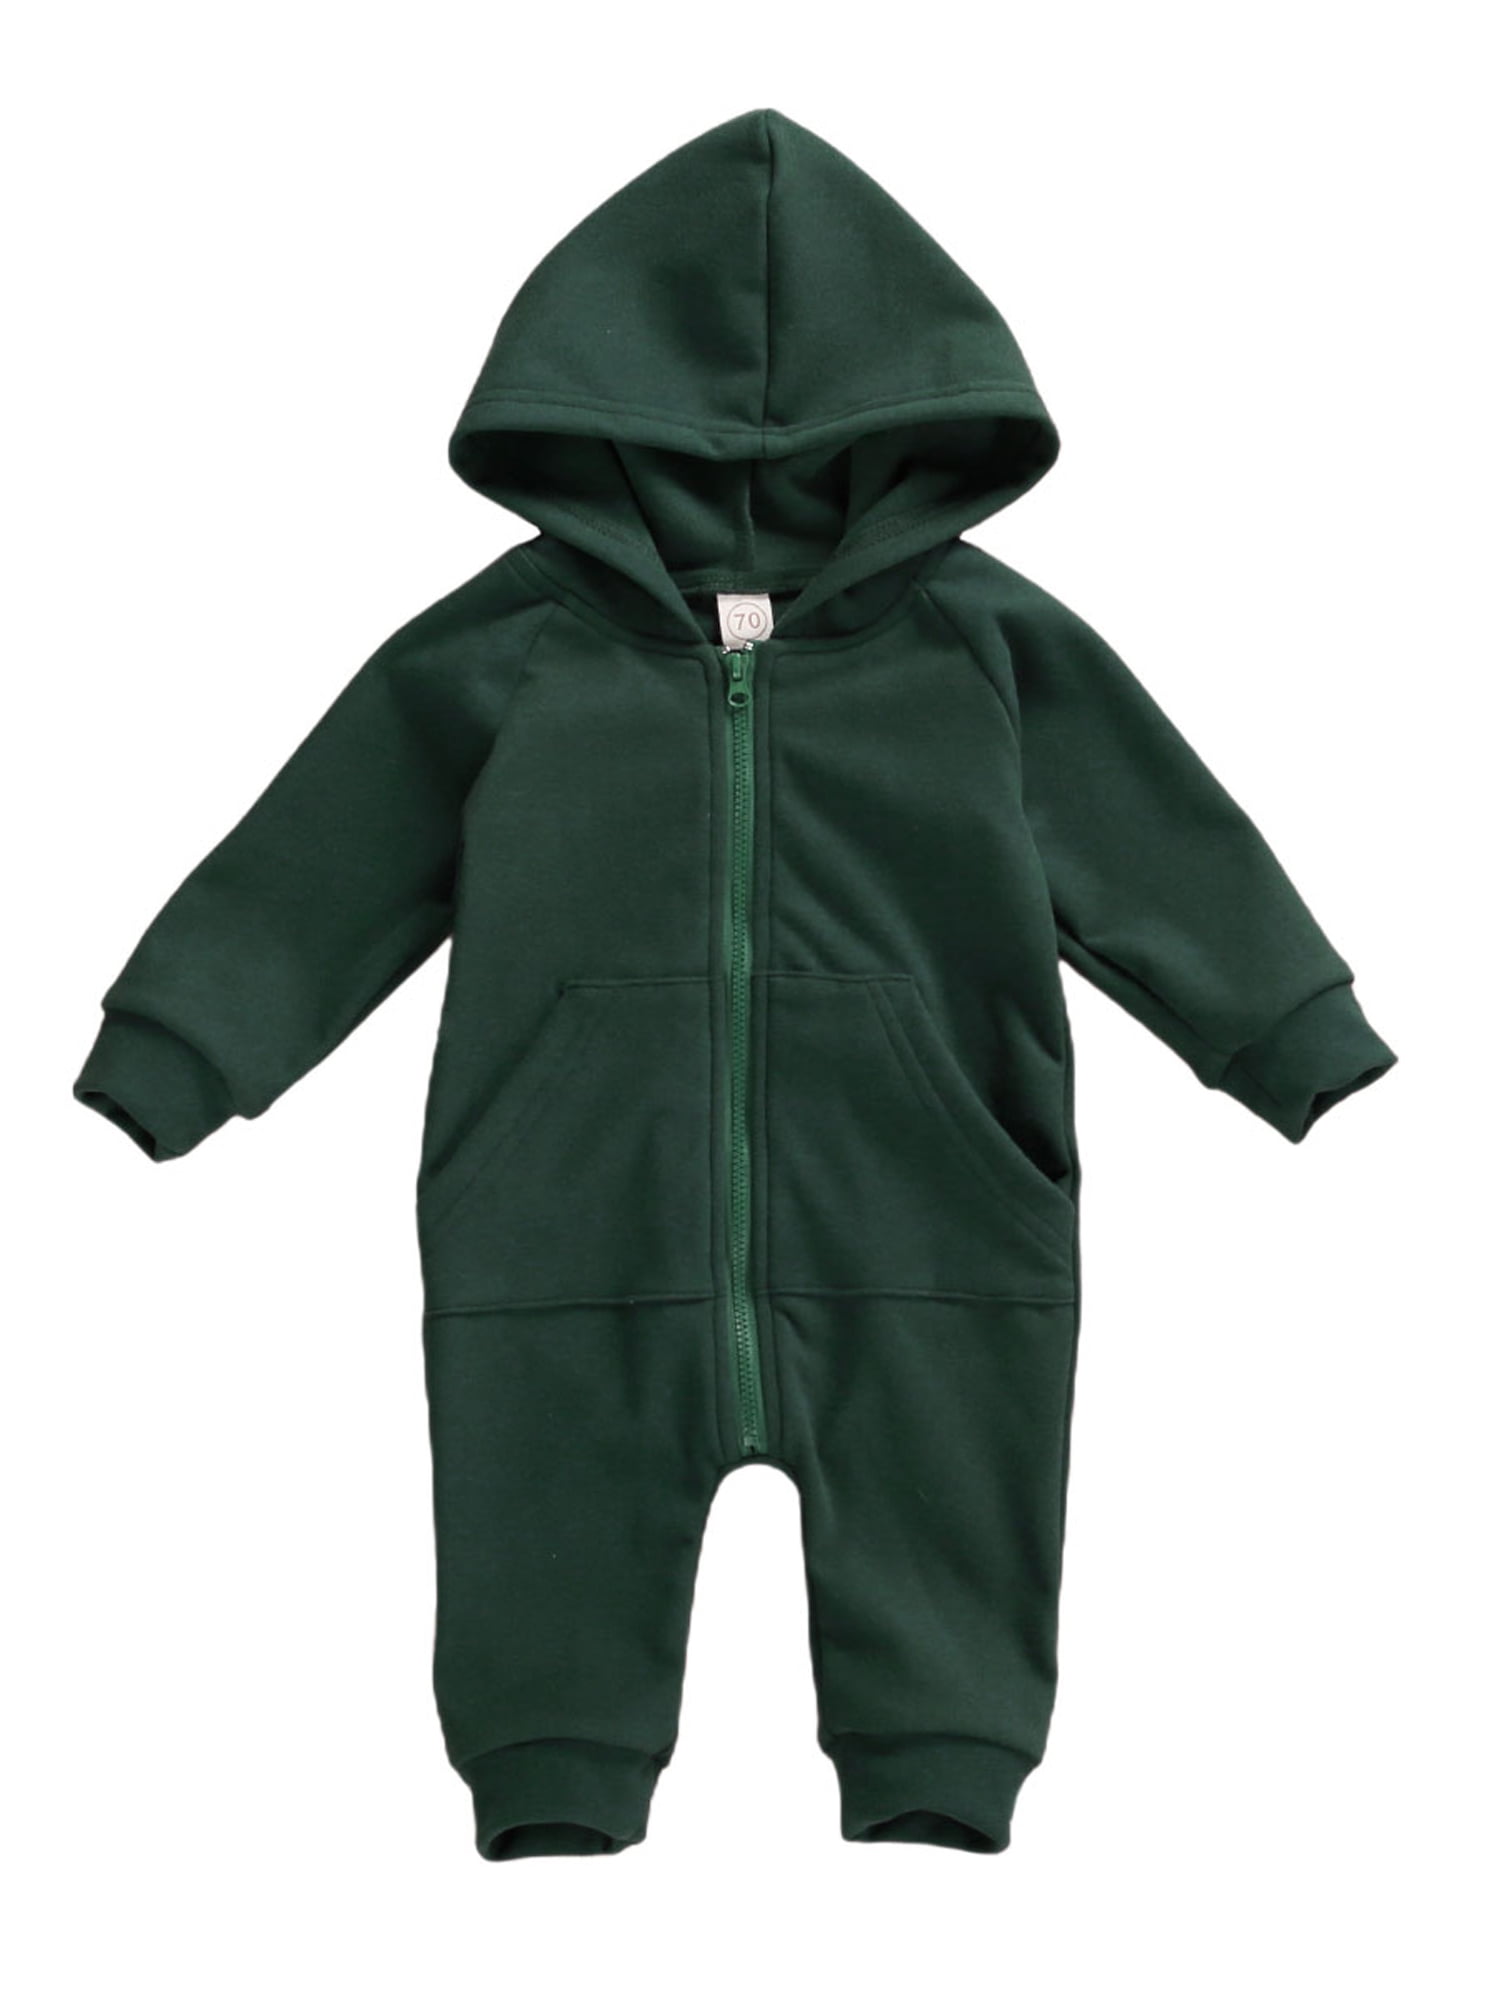 Baby Boy Long Sleeve Hoodie Romper Jumpsuit with Zipper Pocket Outfit